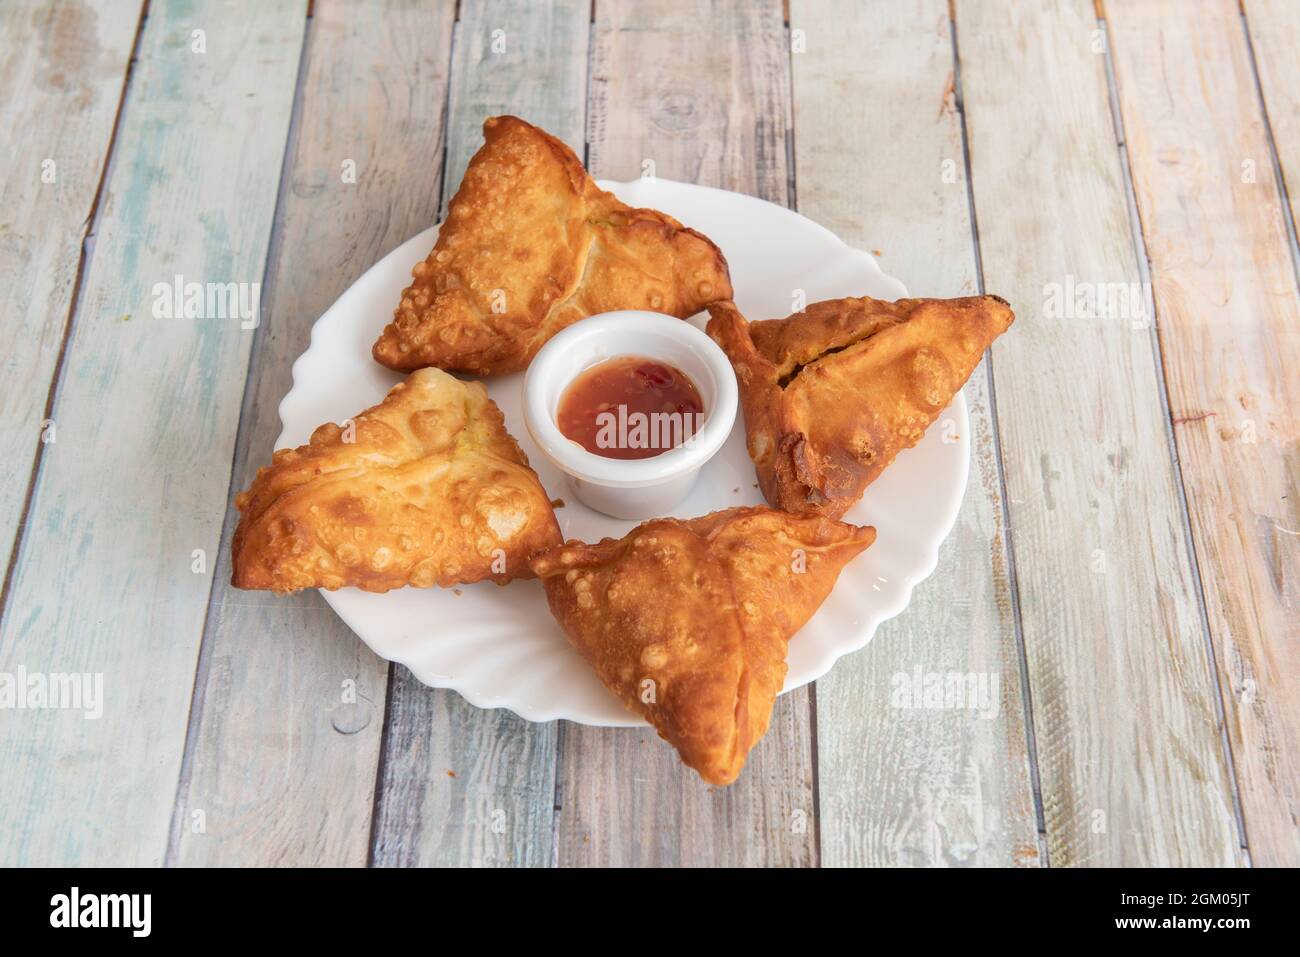 Vegetable samosas fried in oil with sauce in the center to dip Stock Photo